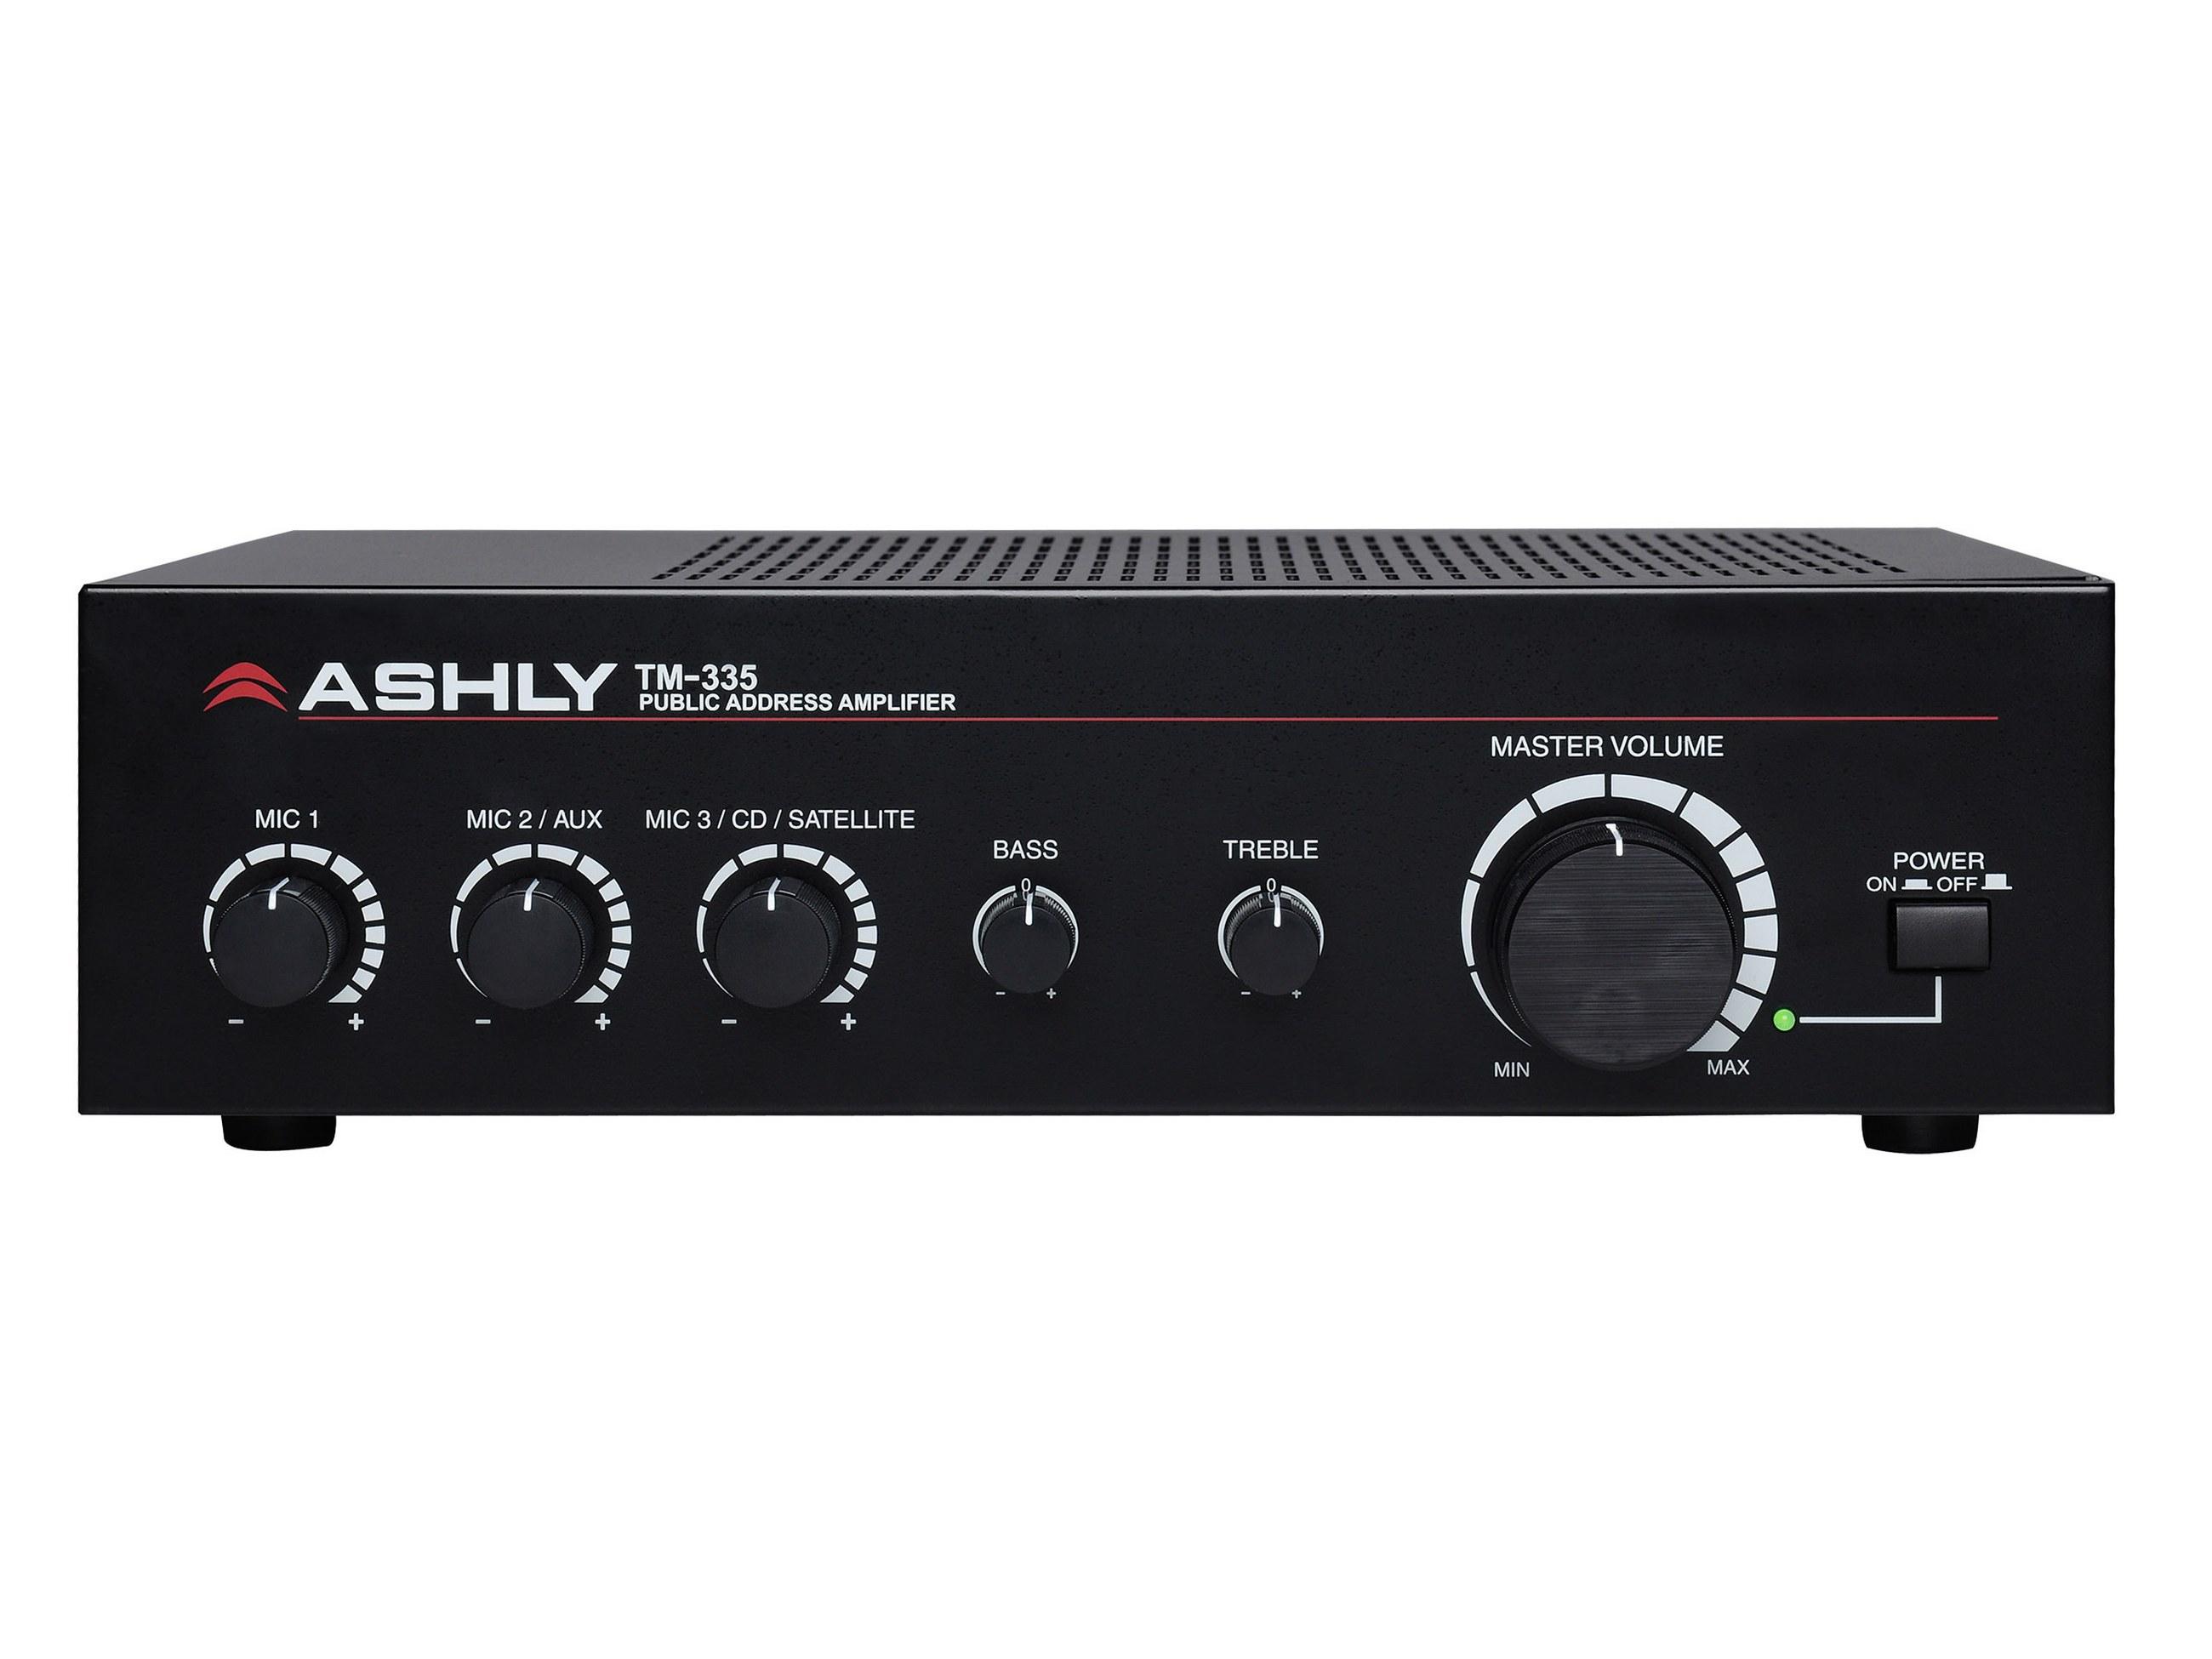 TM-335 35-W 3-Input Mixer/Amplifier with XFMR Isolated Constant-Voltage/4 Ohm Out by Ashly